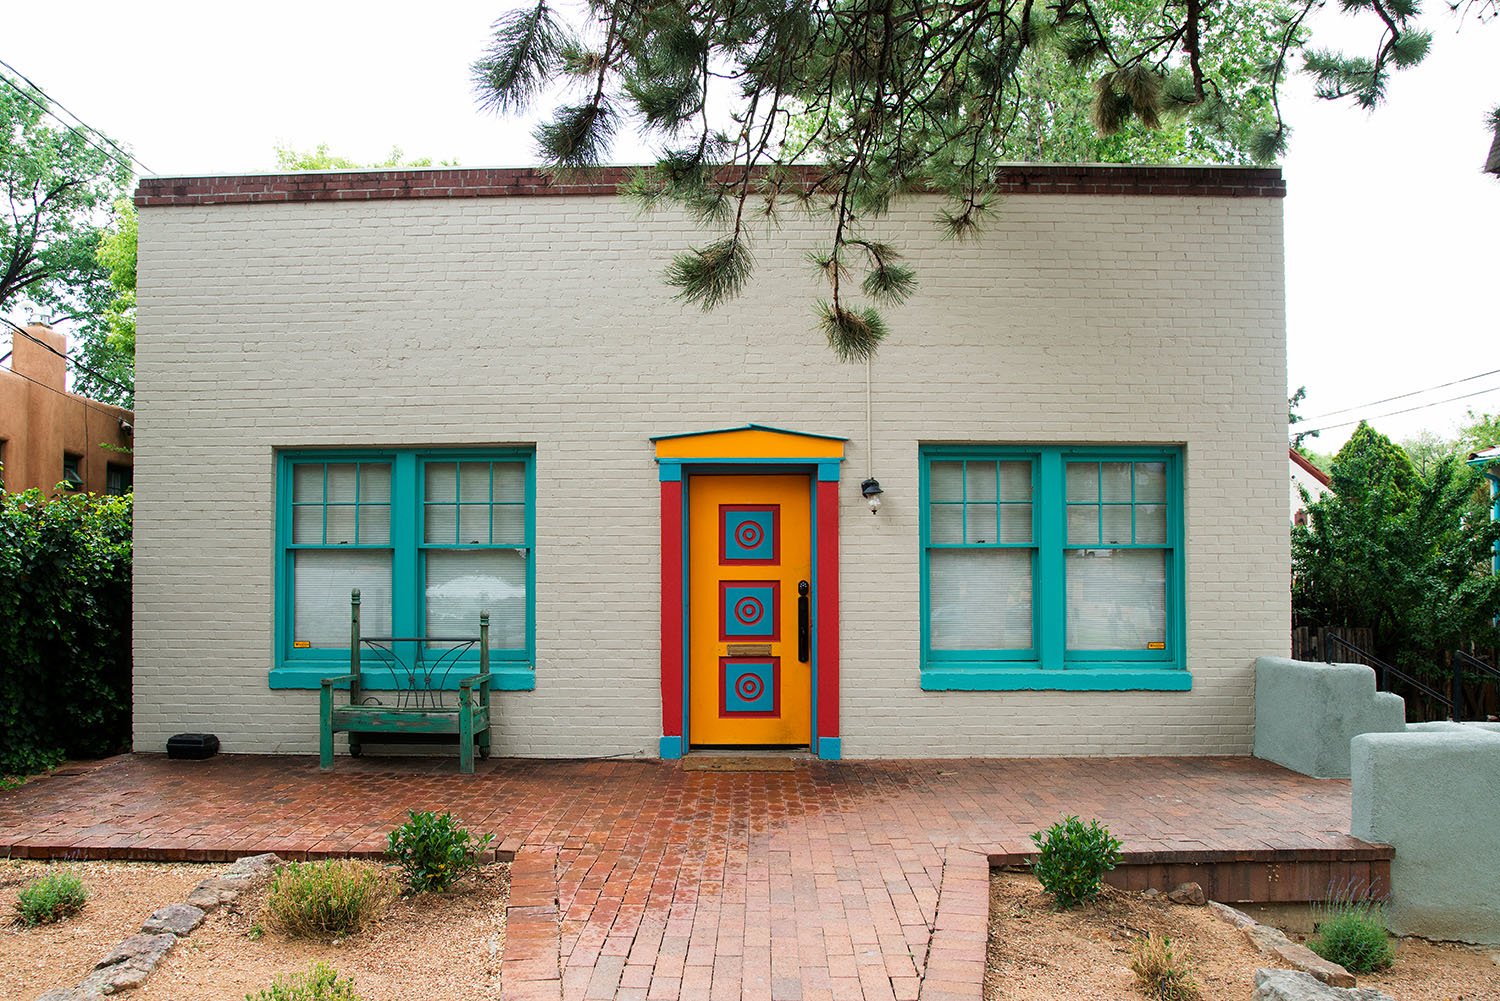 5 Reasons Santa Fe is the Best Place to Live